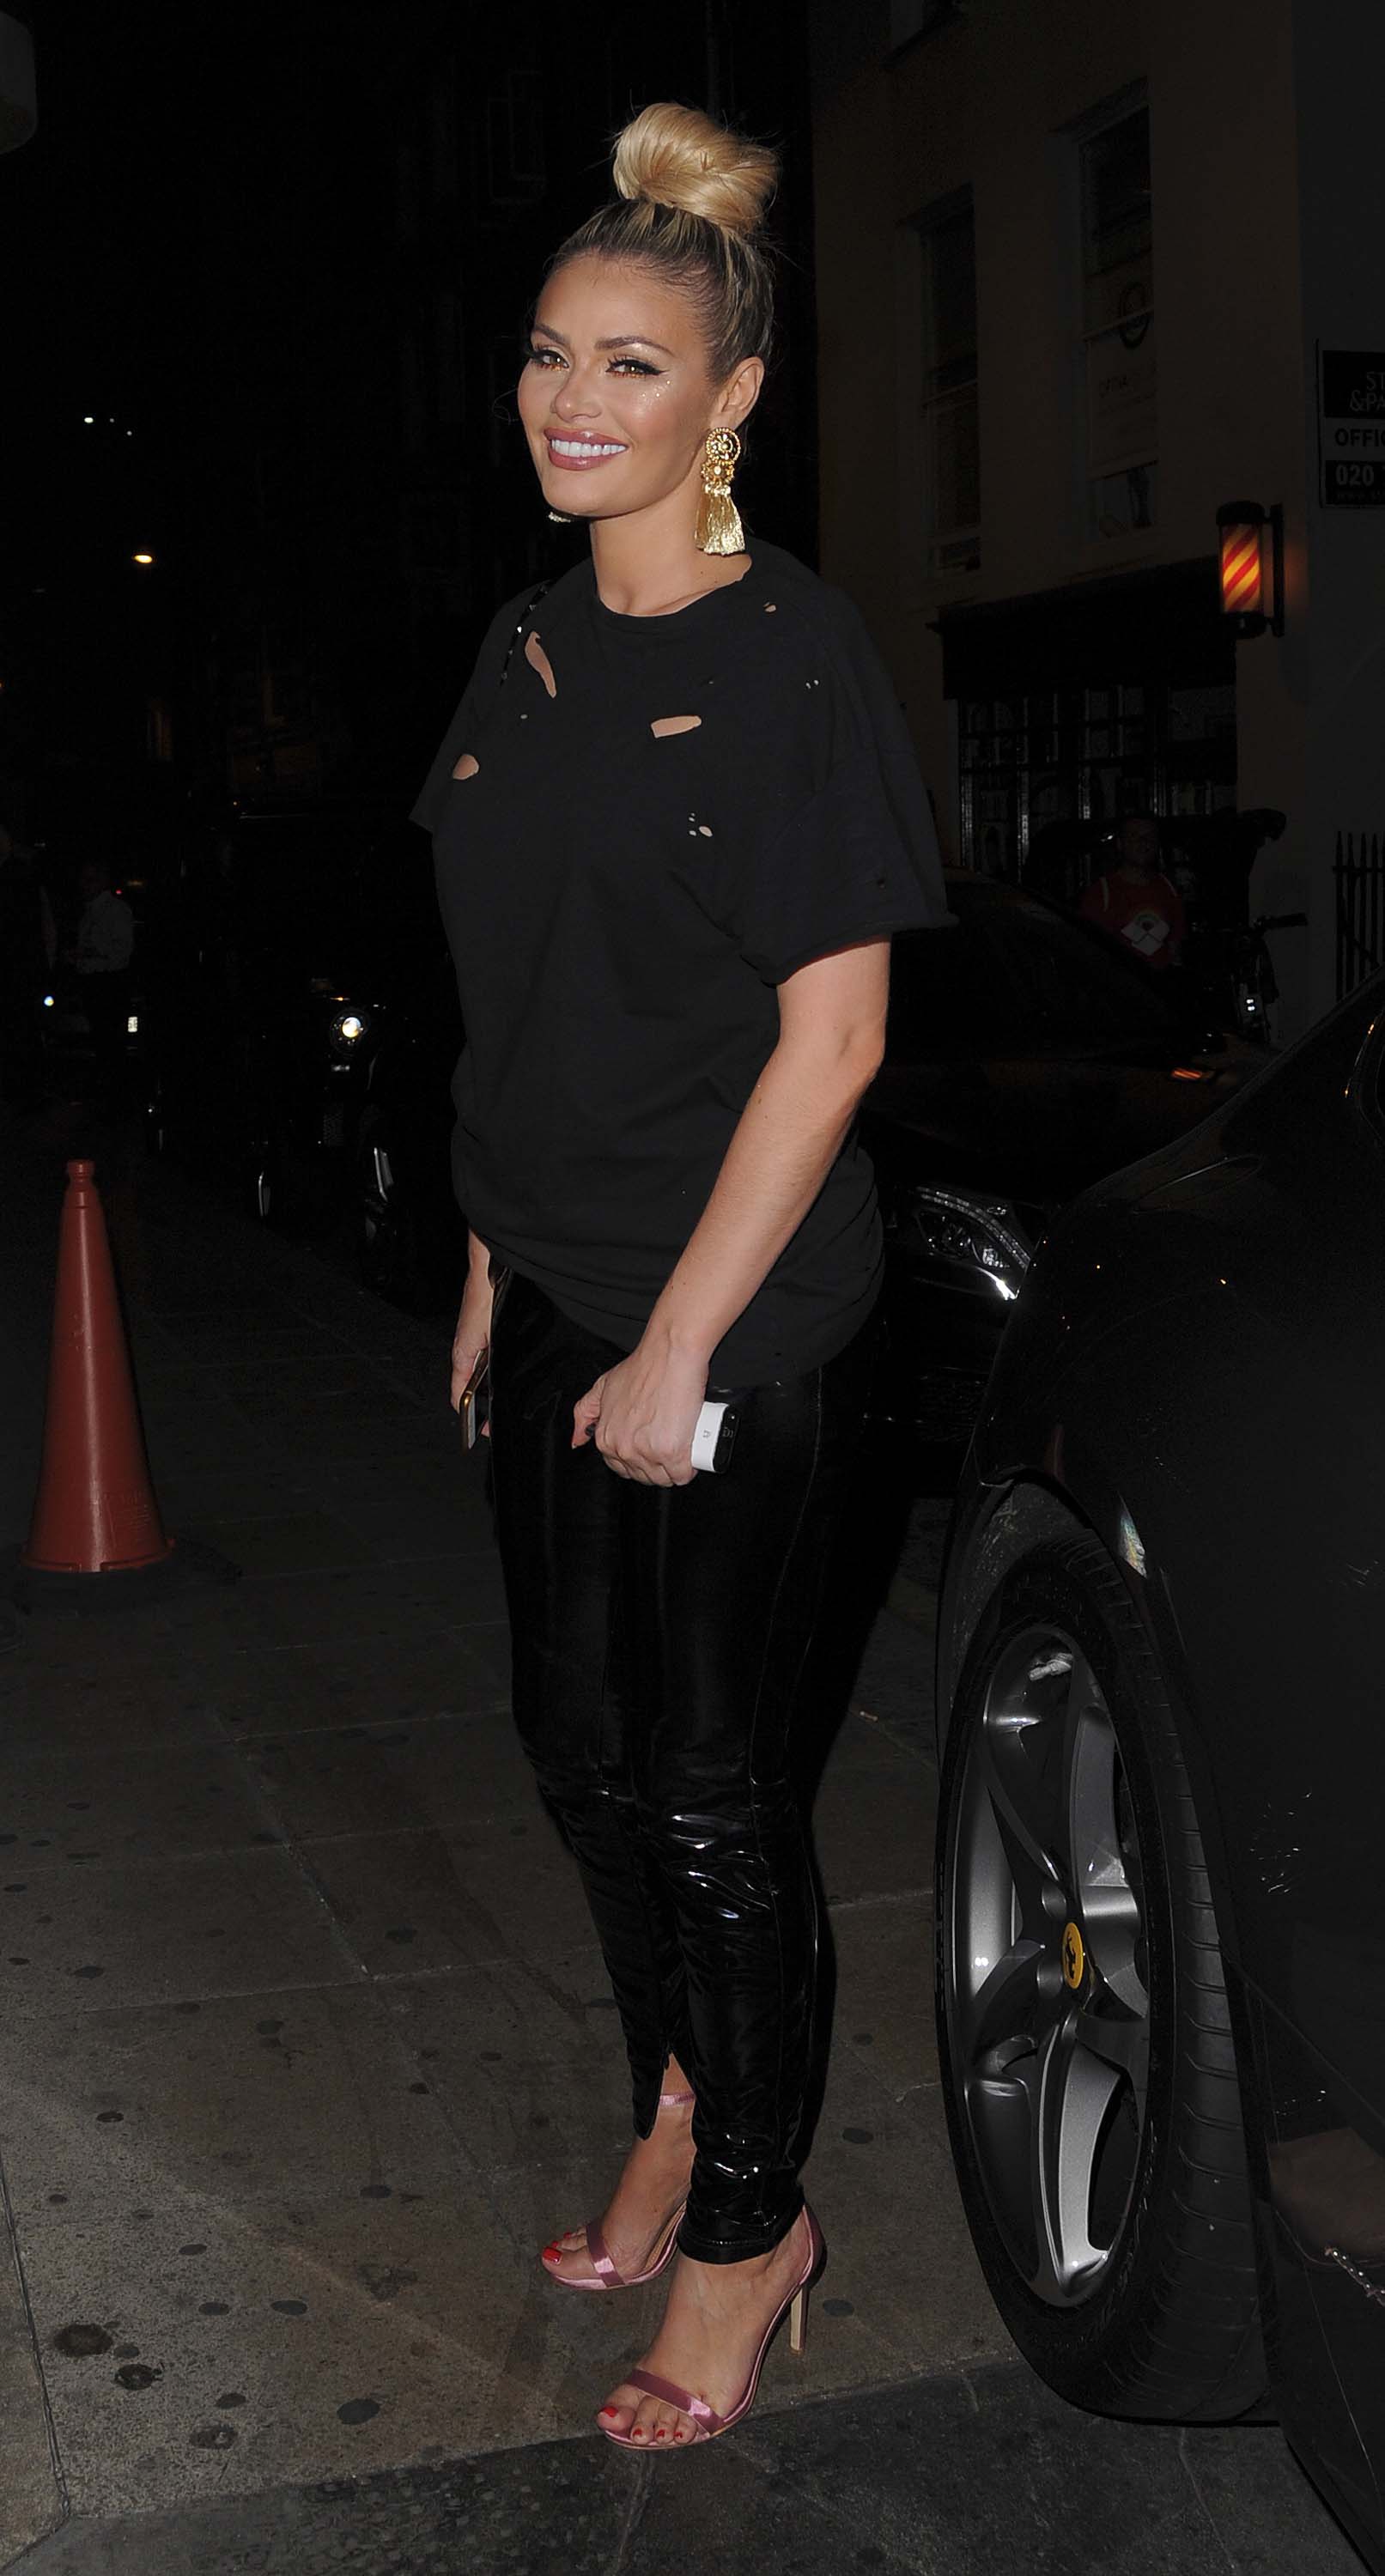 Chloe Sims arriving at the Chiltern Firehouse & Maddox Club